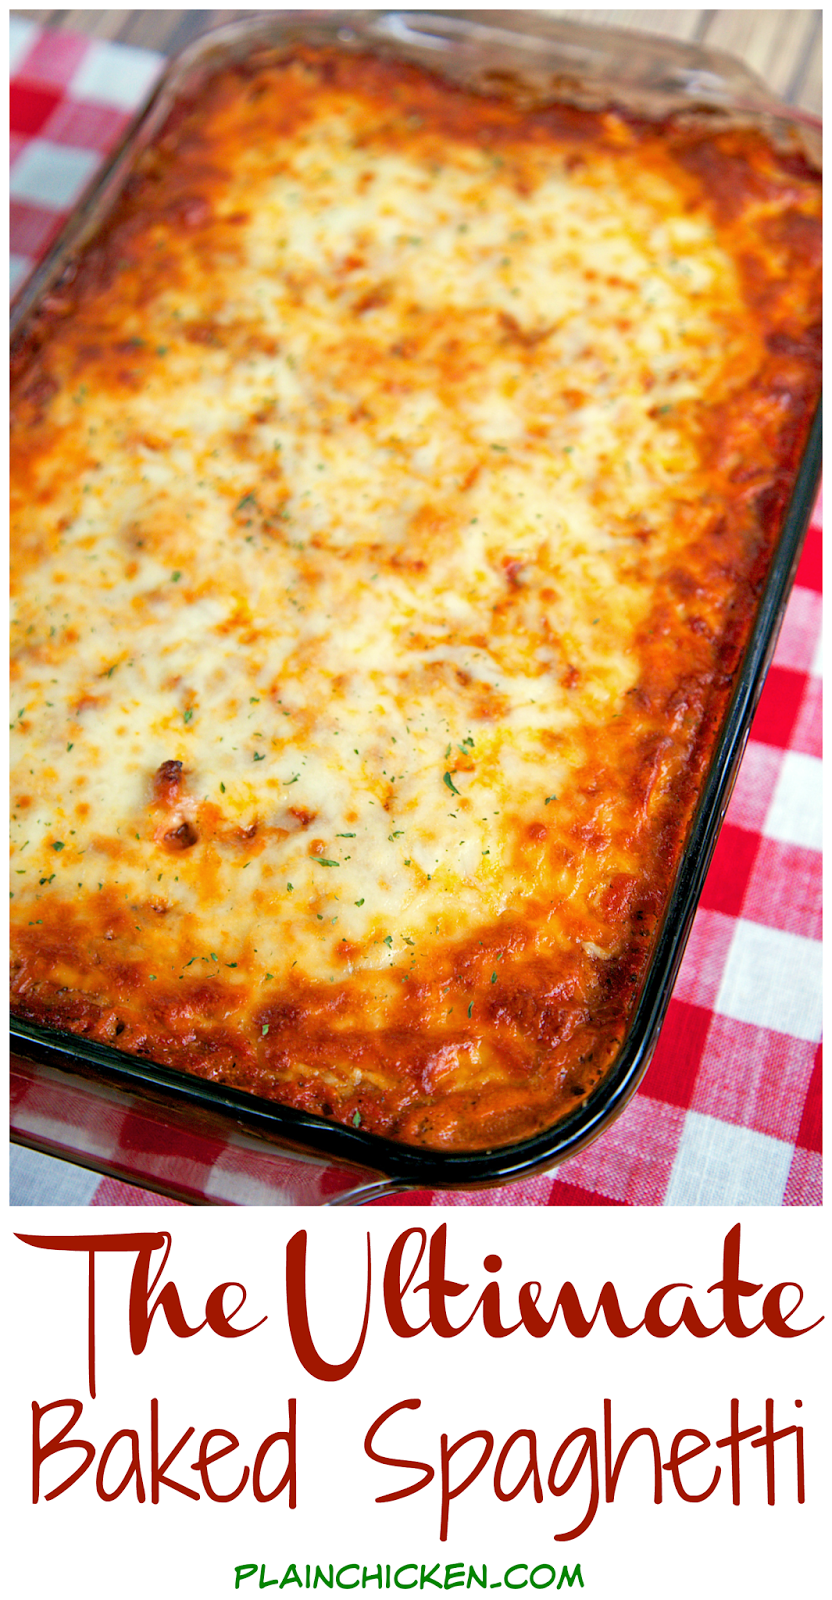 The Ultimate Baked Spaghetti | Plain Chicken®